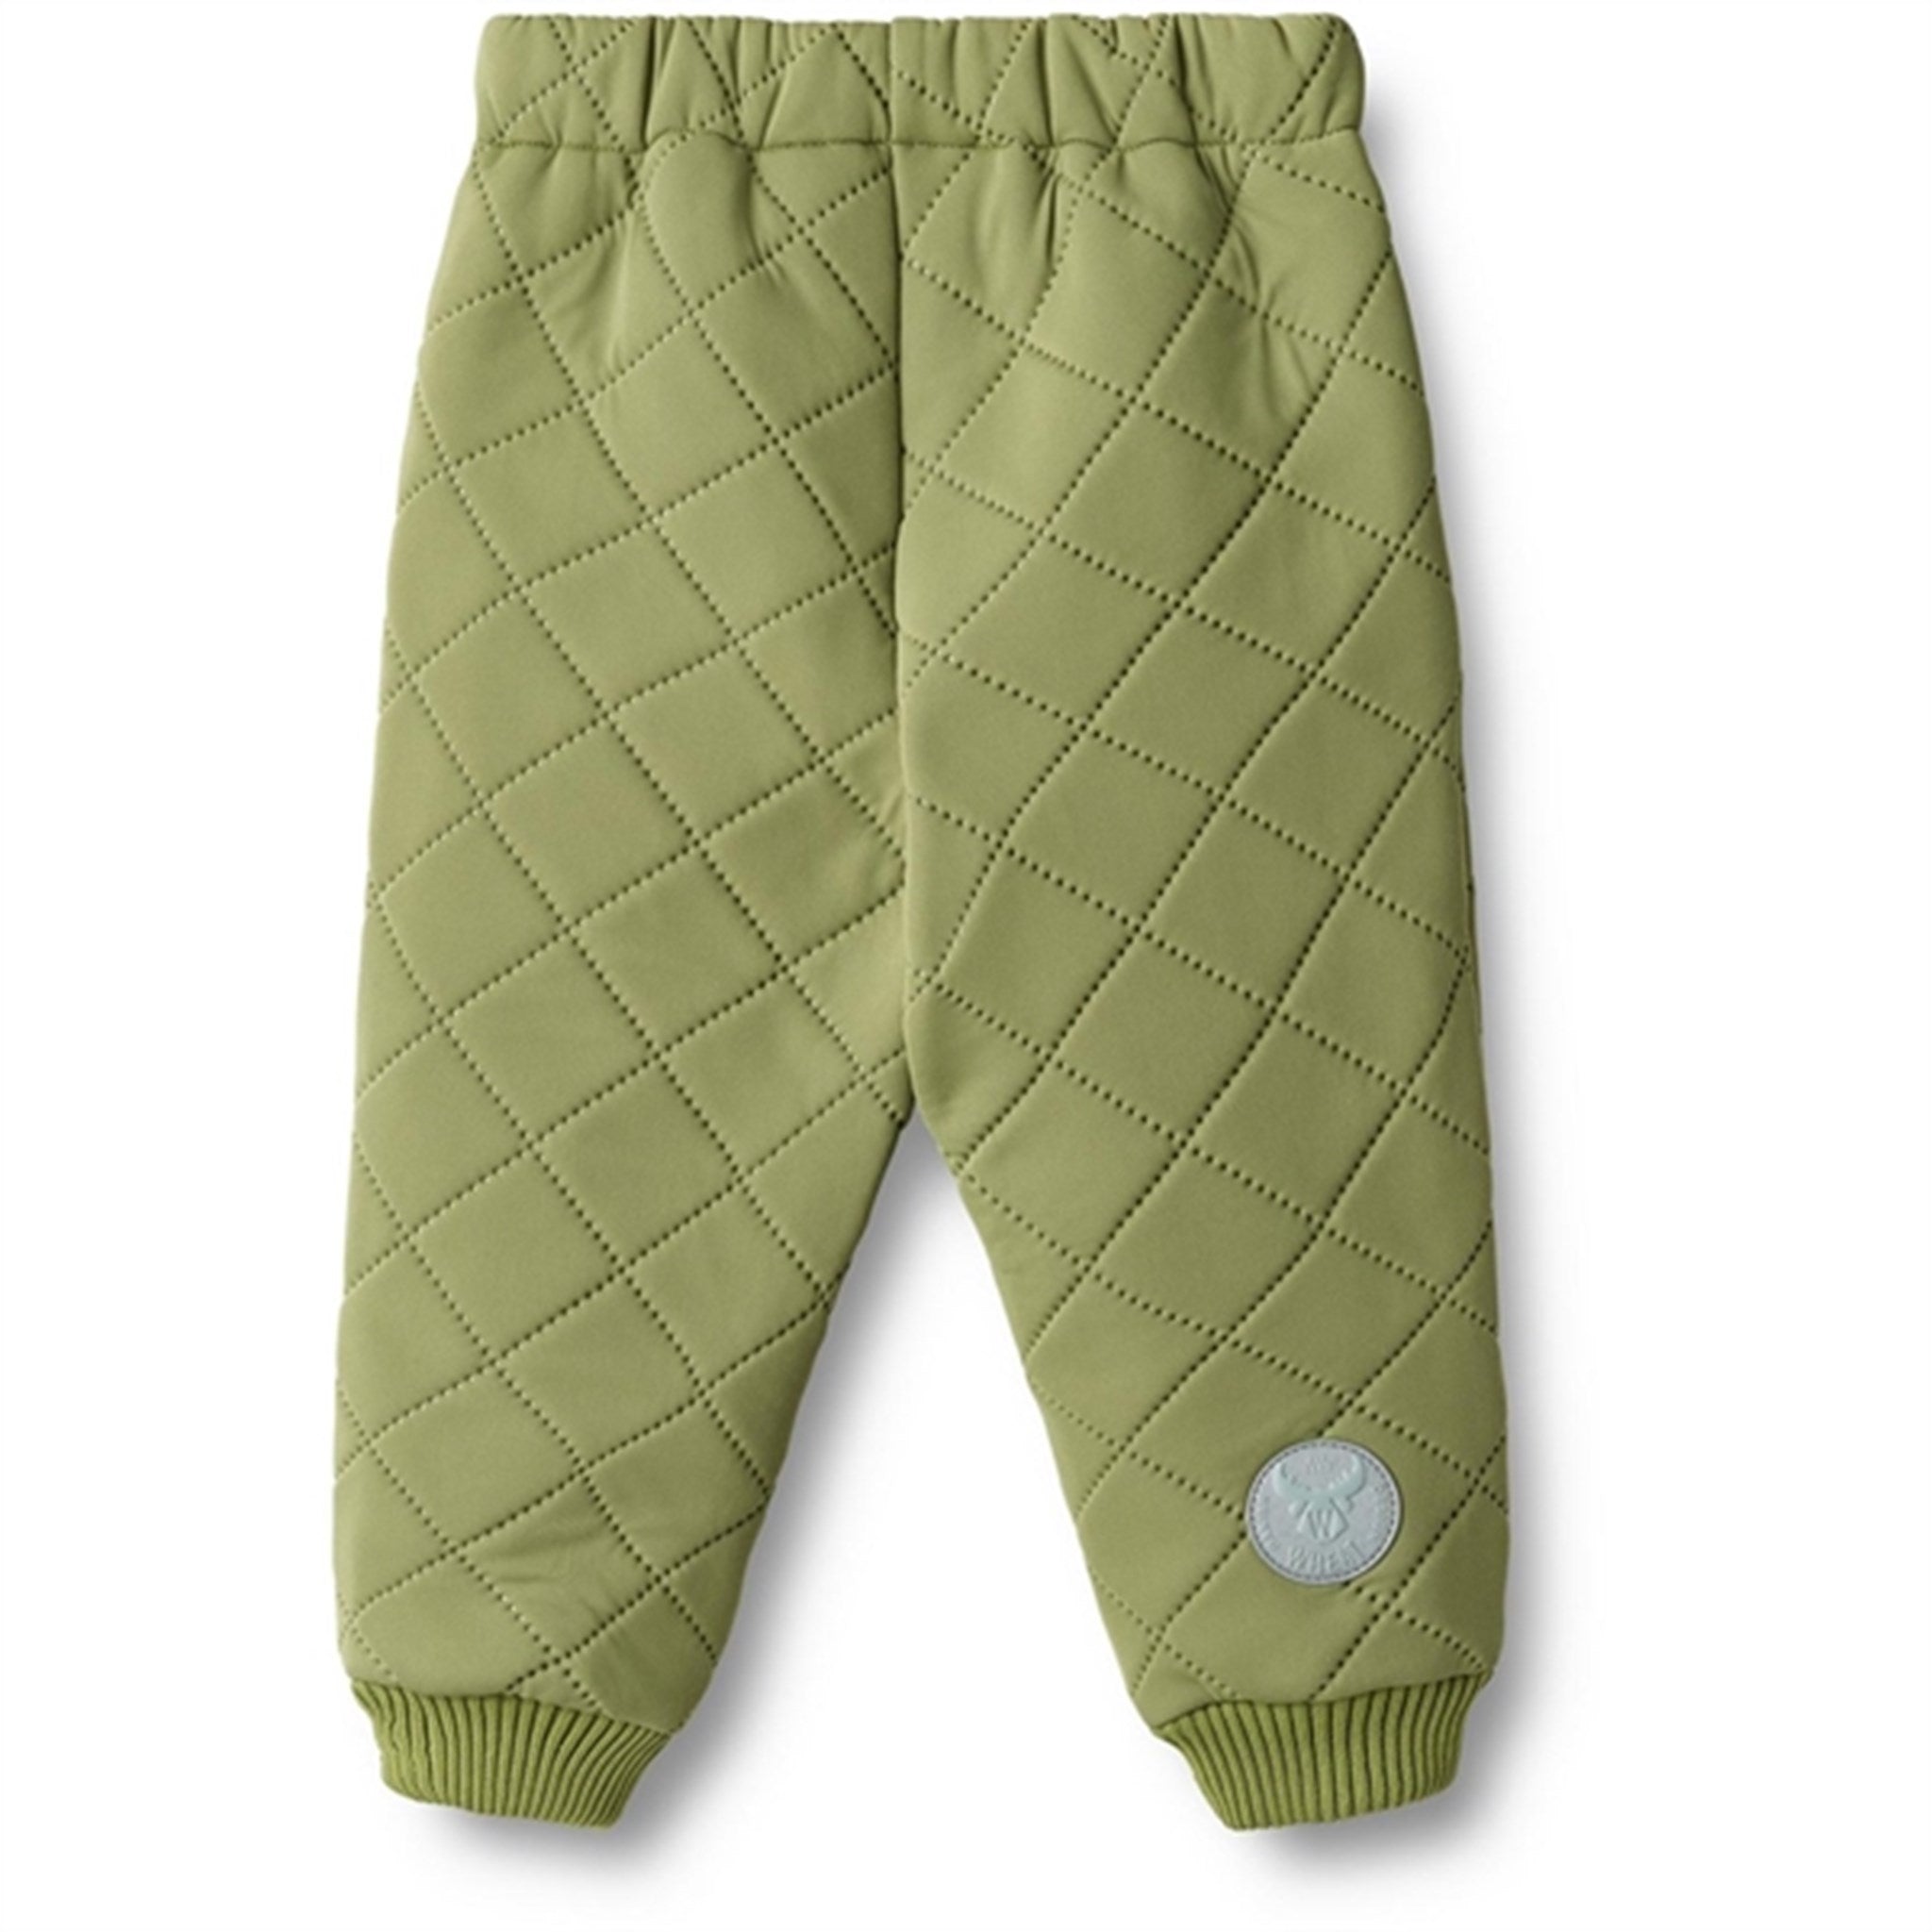 Wheat Thermo Chive Pants Alex 3